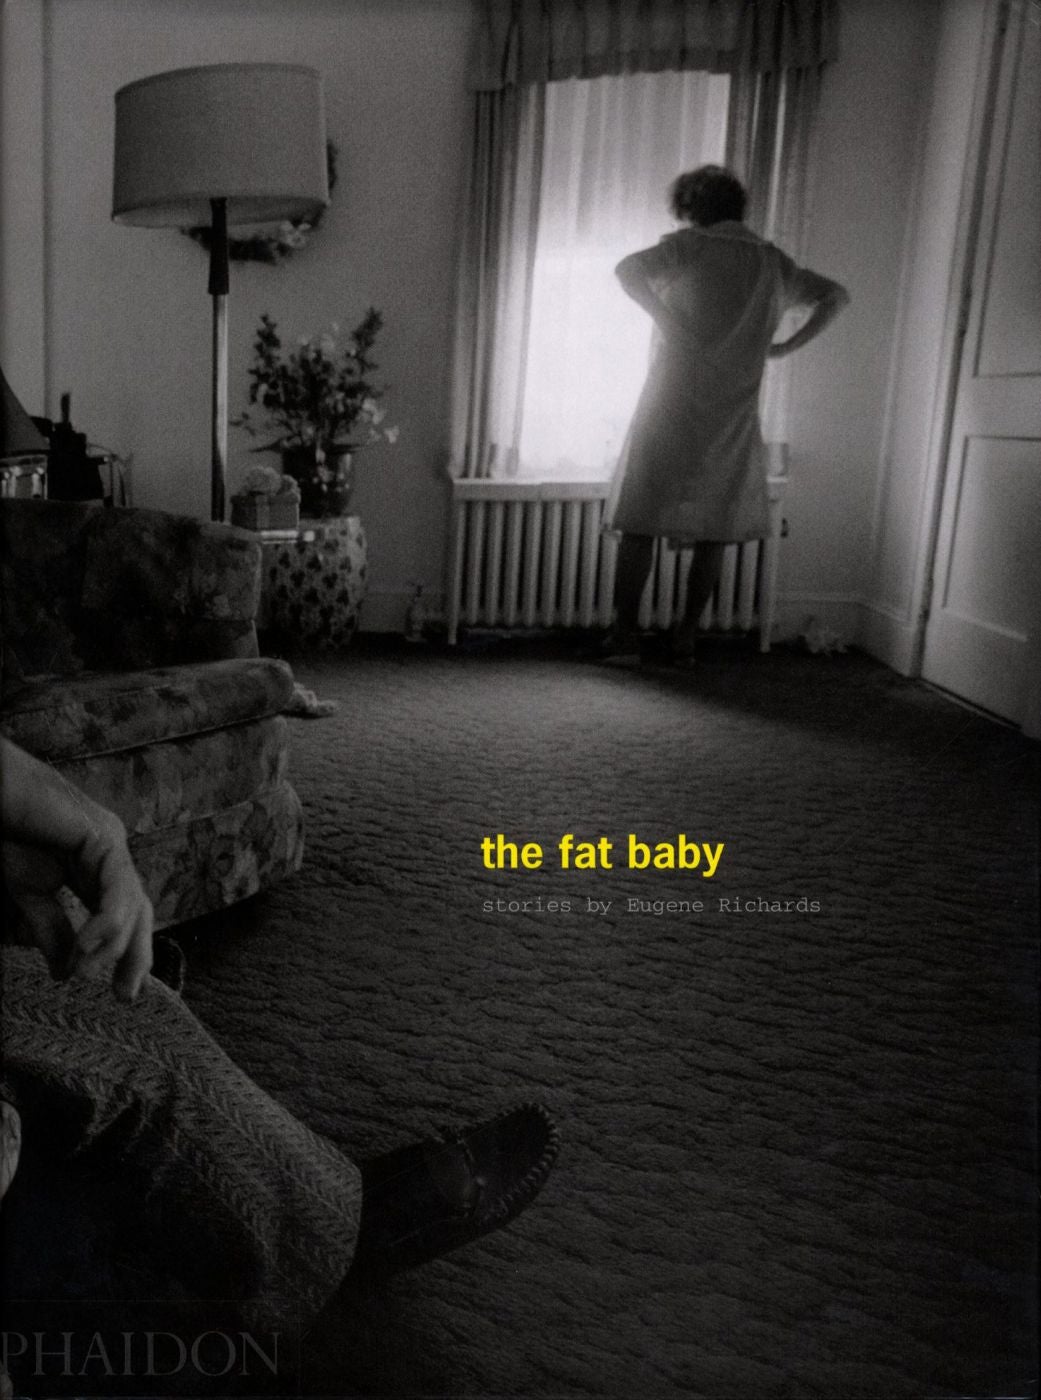 The Fat Baby: Stories by Eugene Richards [SIGNED]